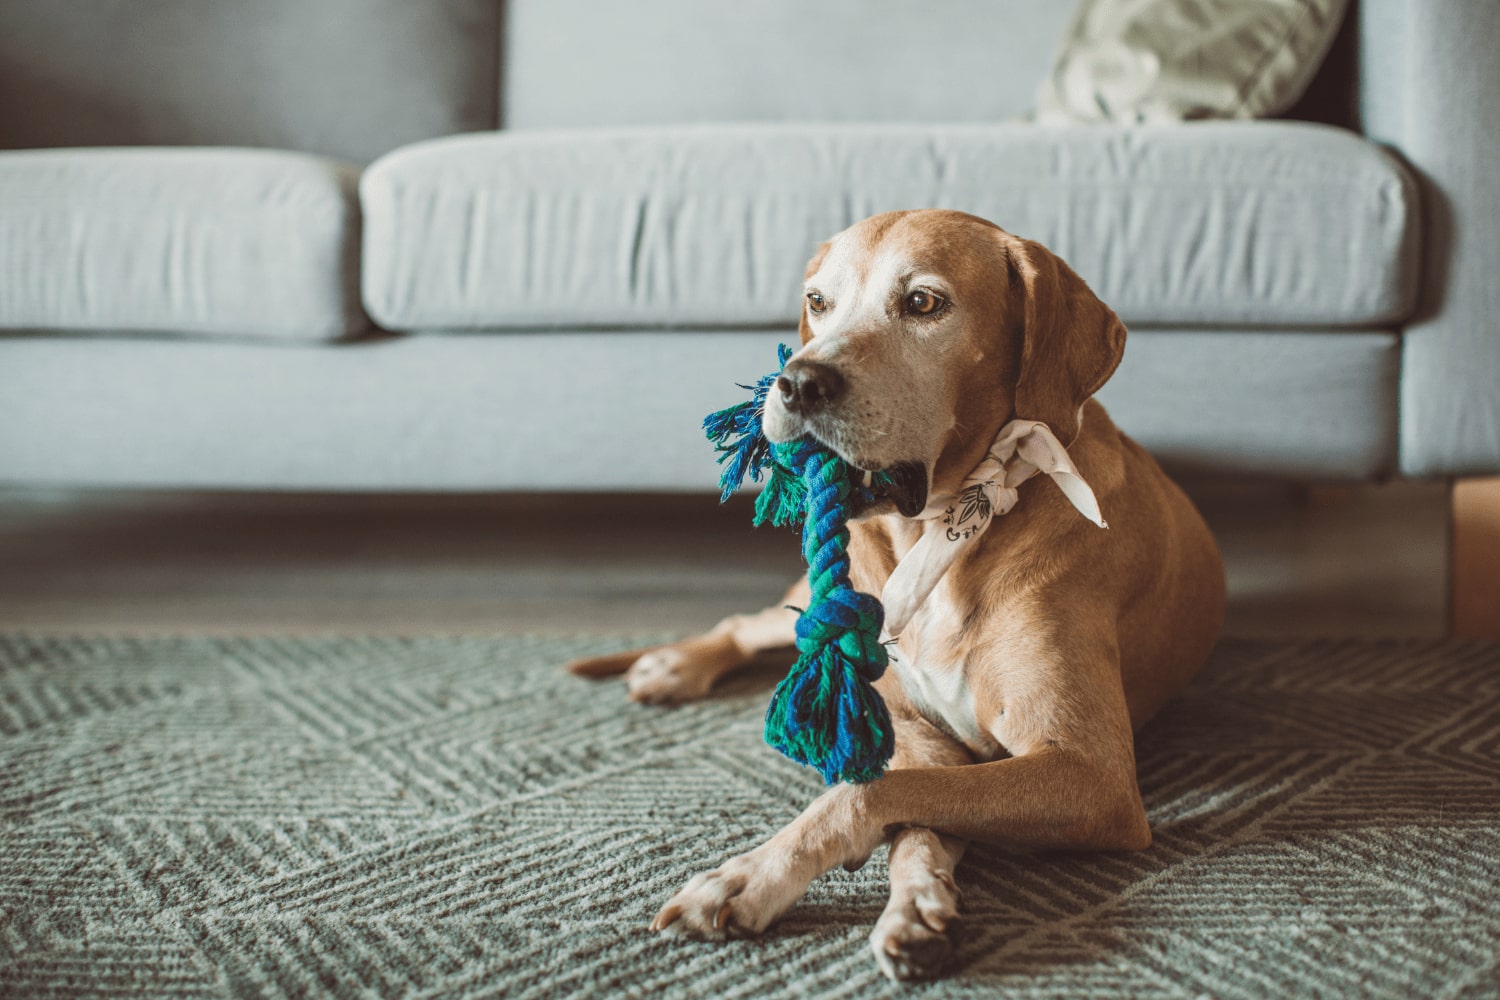 How to become a pet sitter